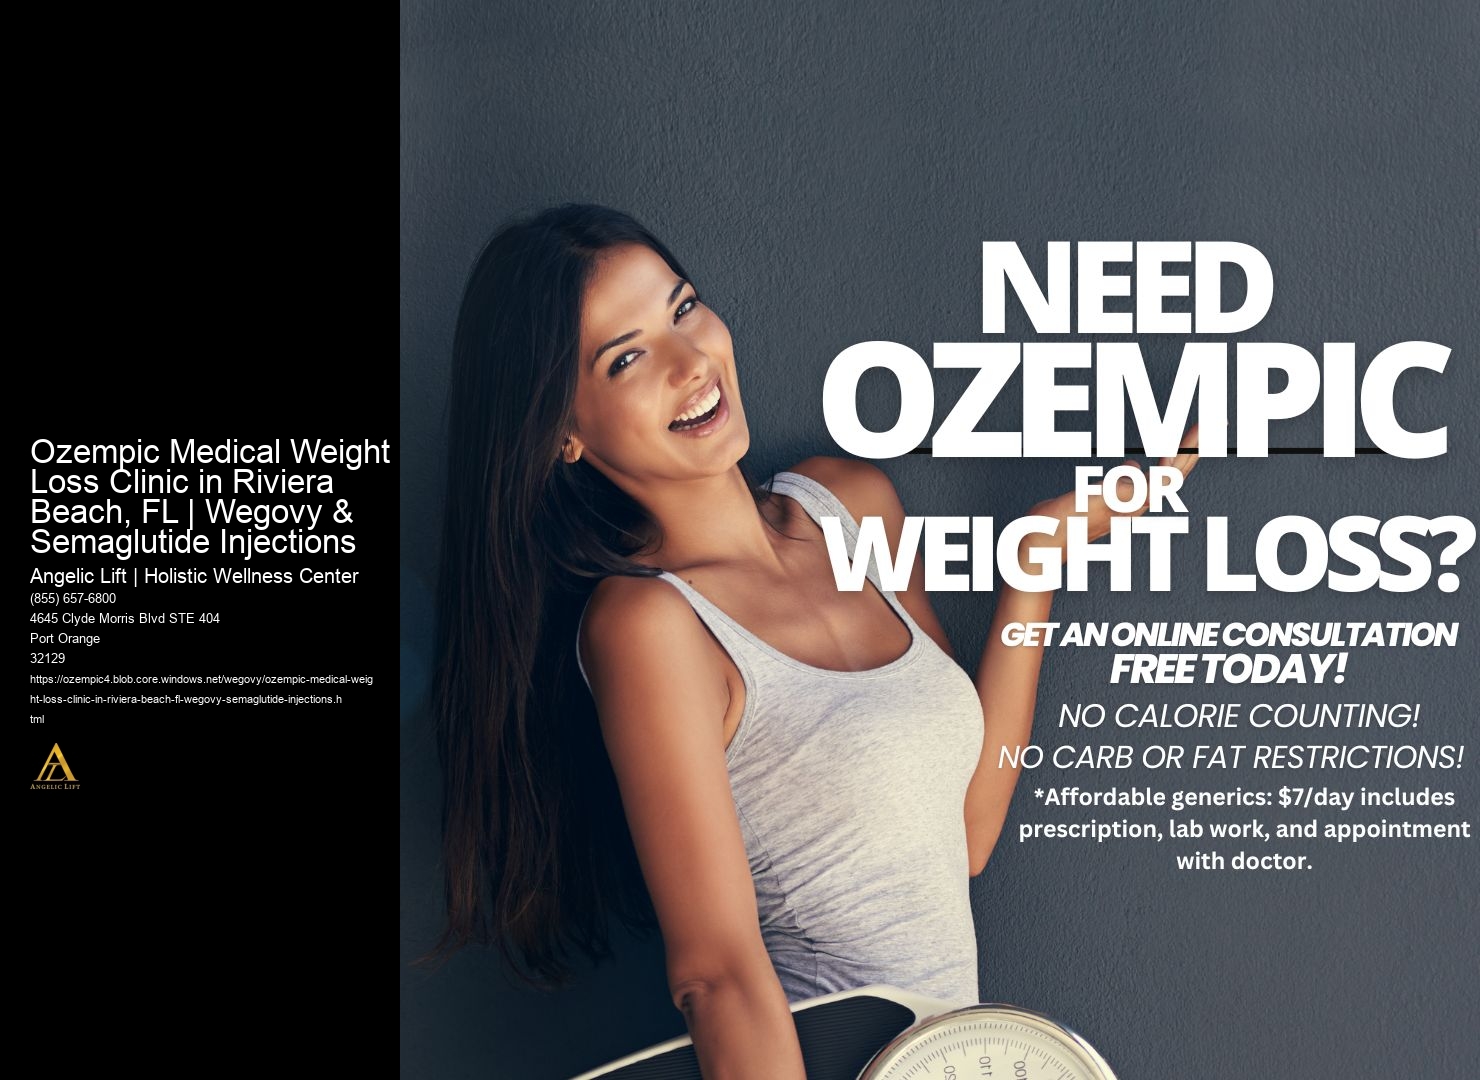 Ozempic Medical Weight Loss Clinic in Riviera Beach, FL | Wegovy & Semaglutide Injections